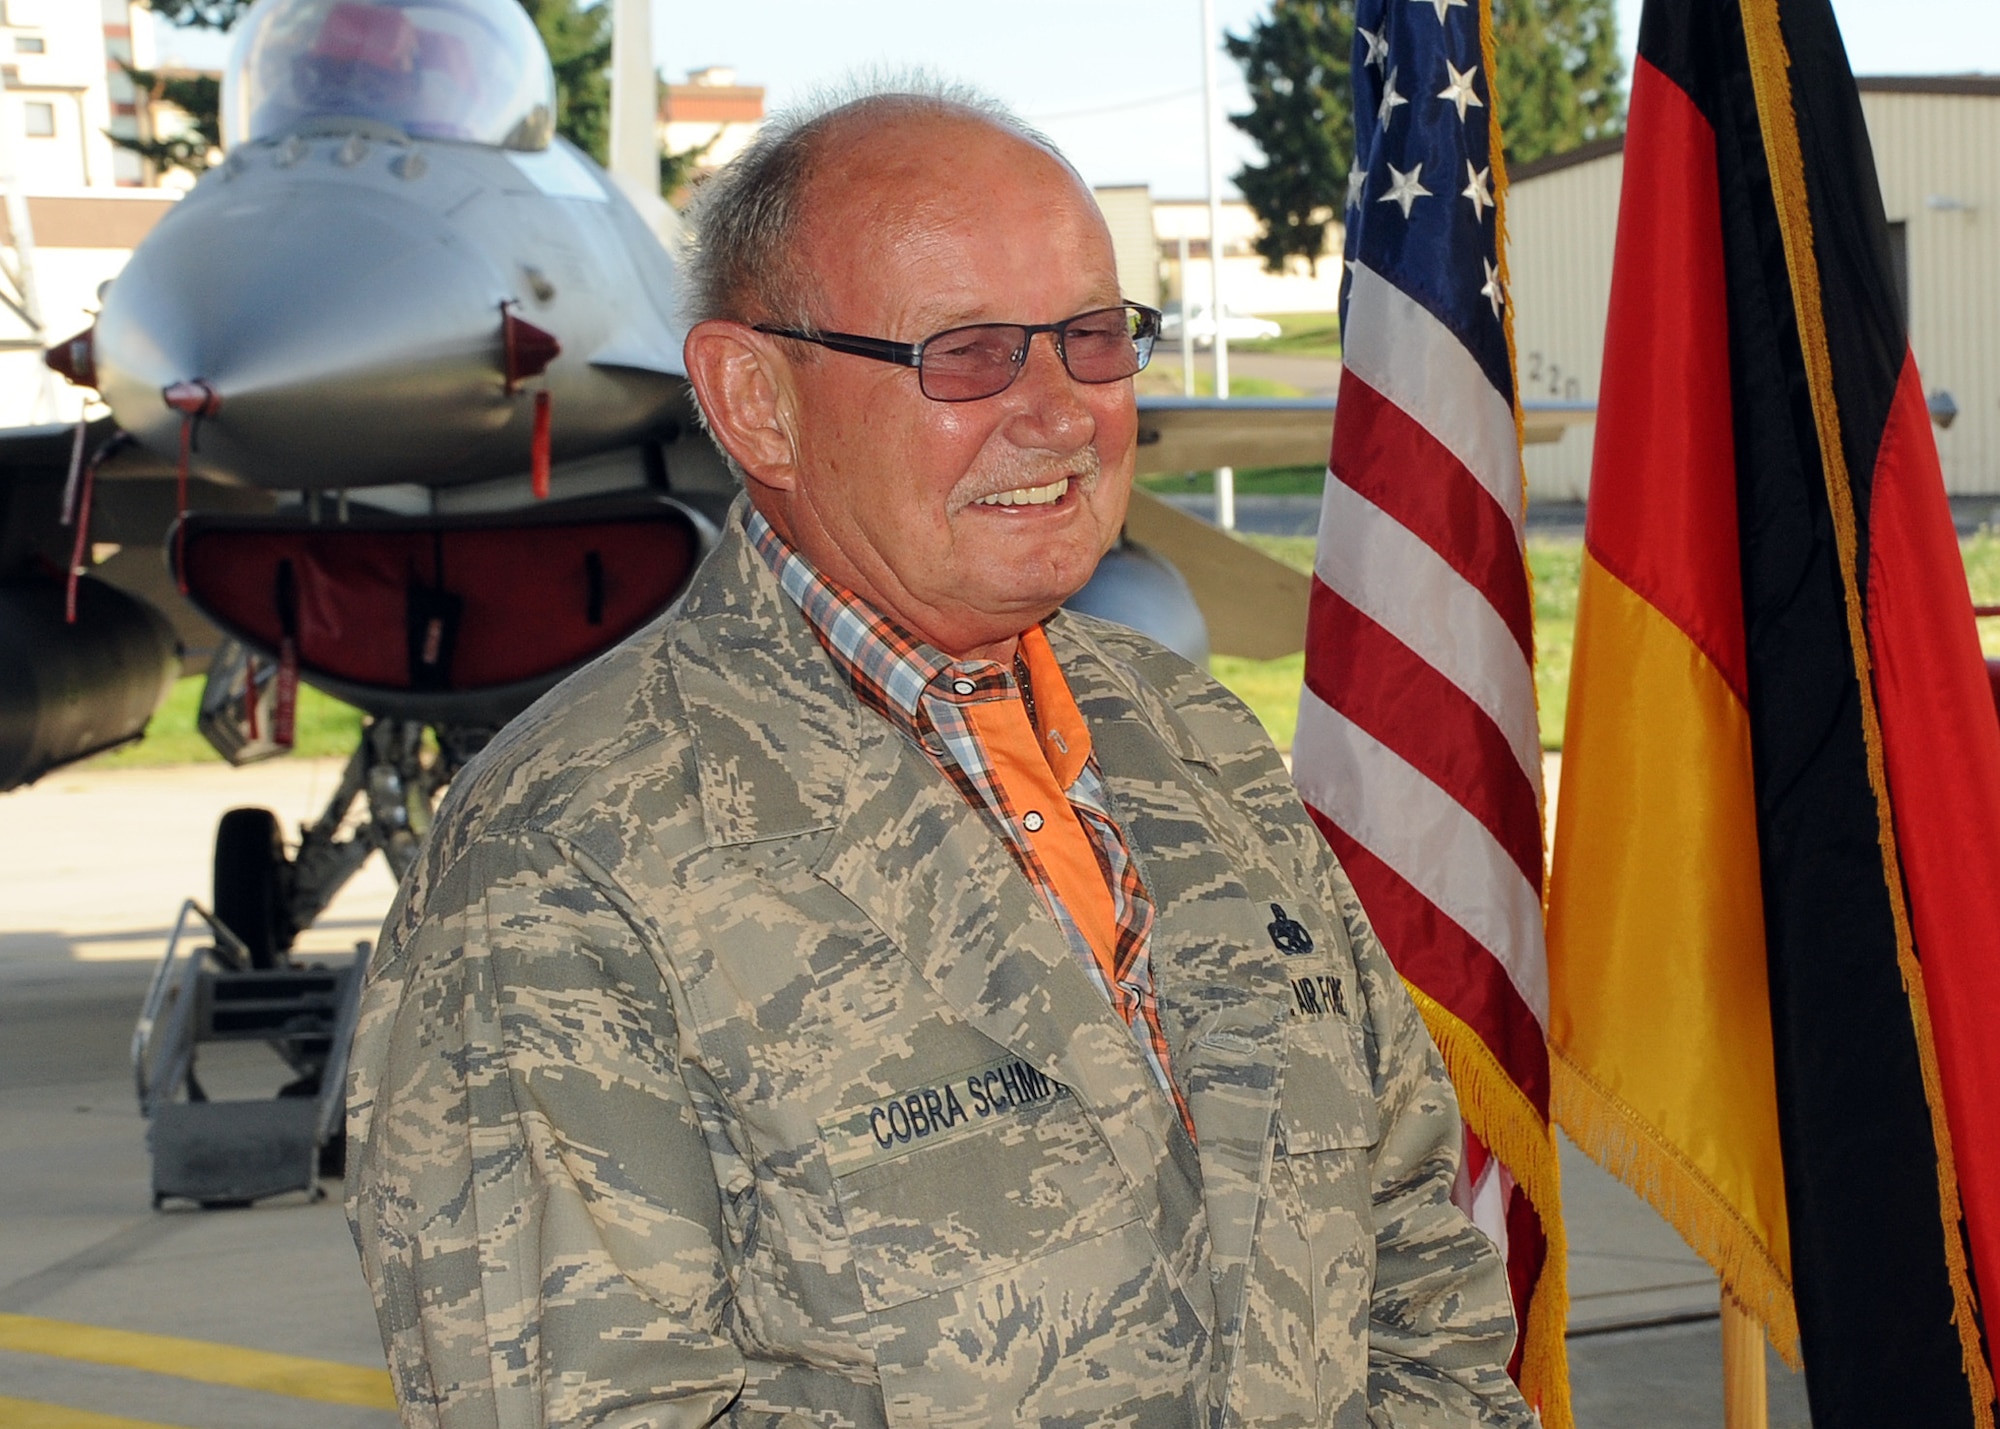 SPANGDAHLEM AIR BASE, Germany – Alois Schmitz, 52nd Component Maintenance Squadron fuels systems repair shop, listens during his retirement ceremony Aug. 17 here to coworkers speak about his near four-decade career. Schmitz, after having donned a custom Airman Battle Uniform blouse, took the podium and thanked the more than 100 Airmen, family and friends who had attended the ceremony. The name tag on the uniform reads “Cobra Schmitz,” which was Schmitz’ unofficial radio call sign. (U.S. Air Force photo by Staff Sgt. Daryl Knee/Released)